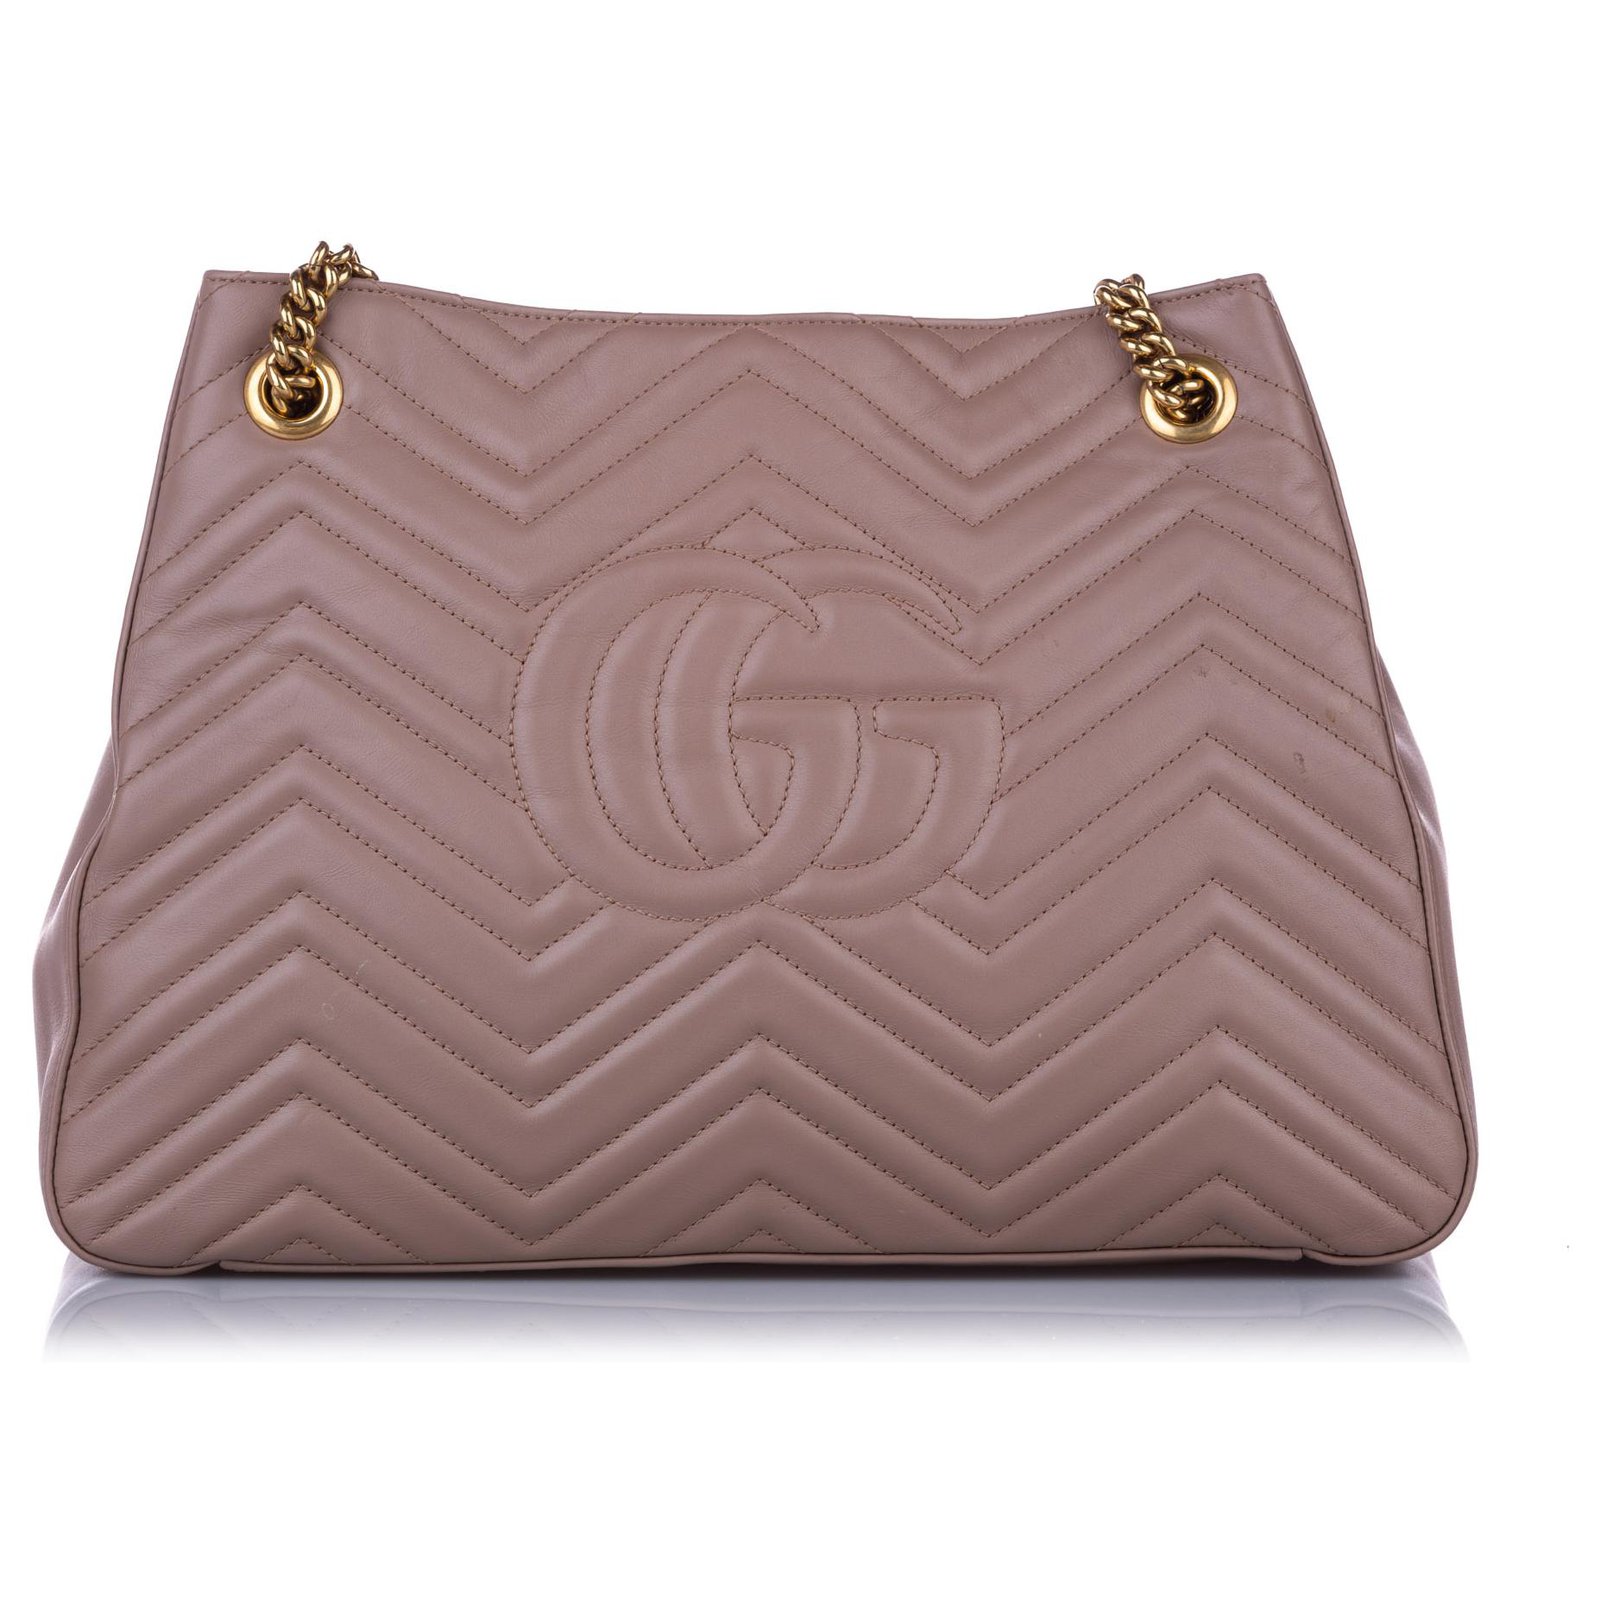 GUCCI GG Marmont Metelasse Medium Quilted Leather Shoulder Bag 453569-US